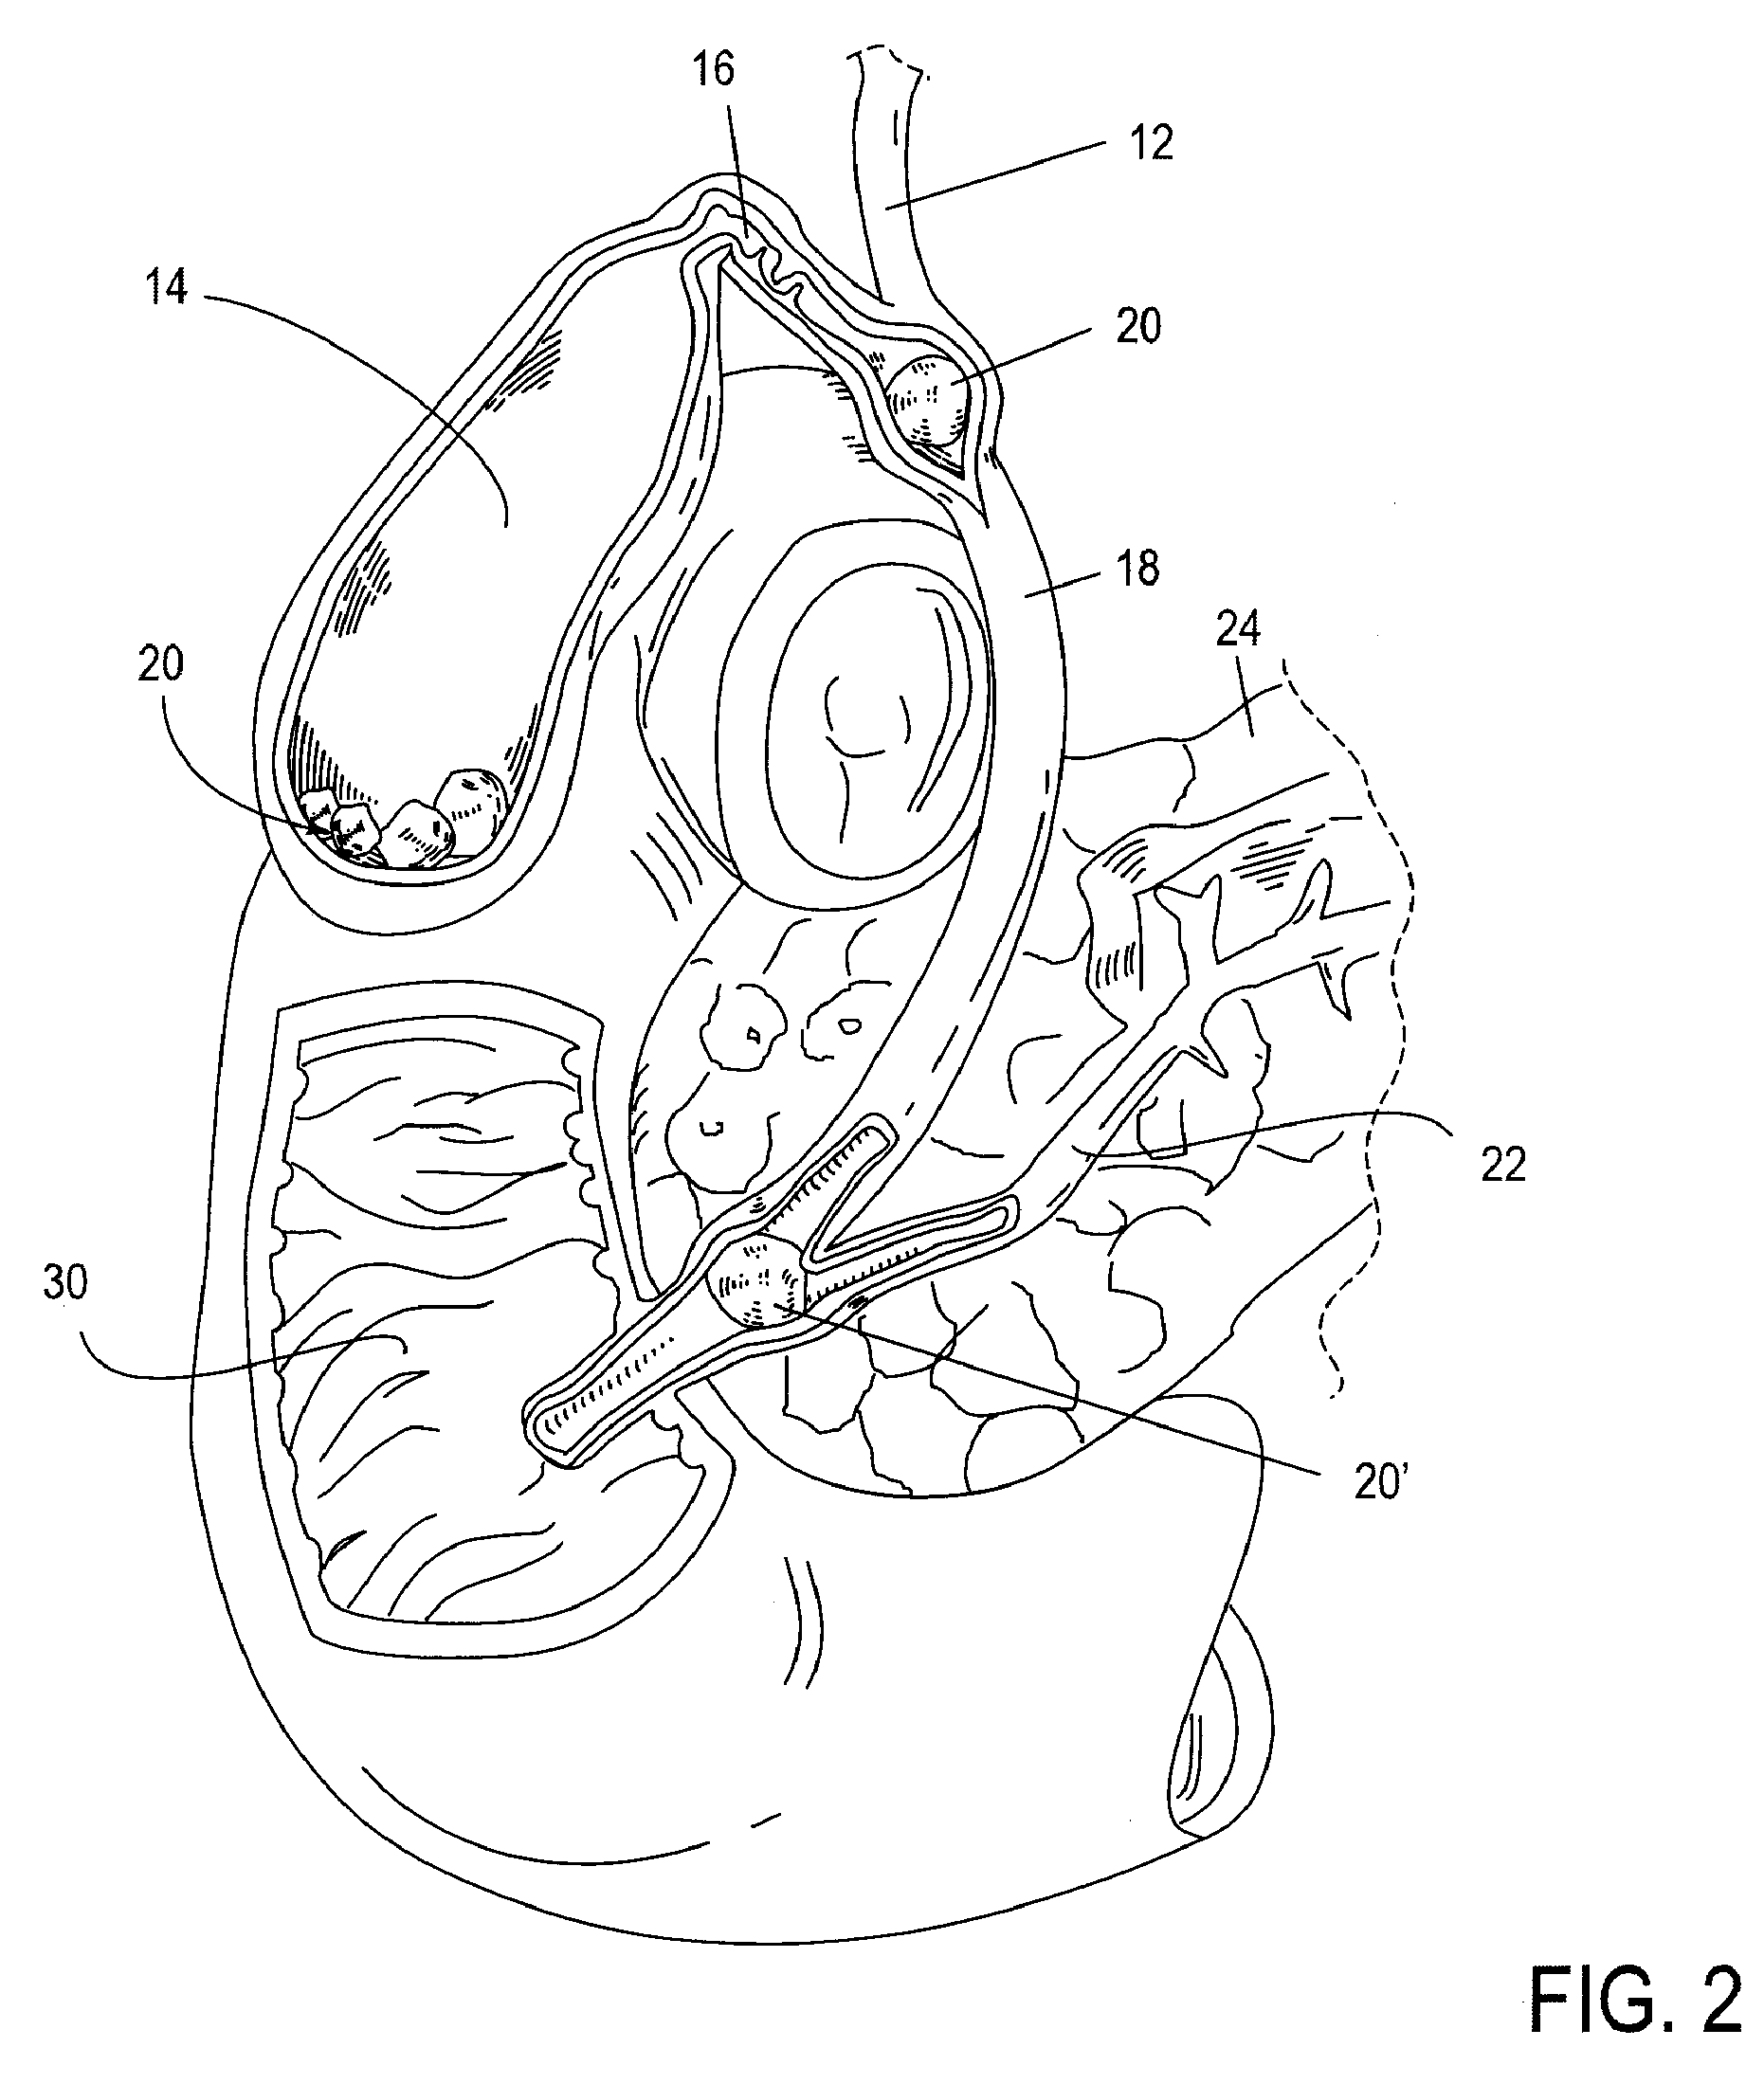 Methods, Devices, Kits and Systems for Defunctionalizing the Cystic Duct